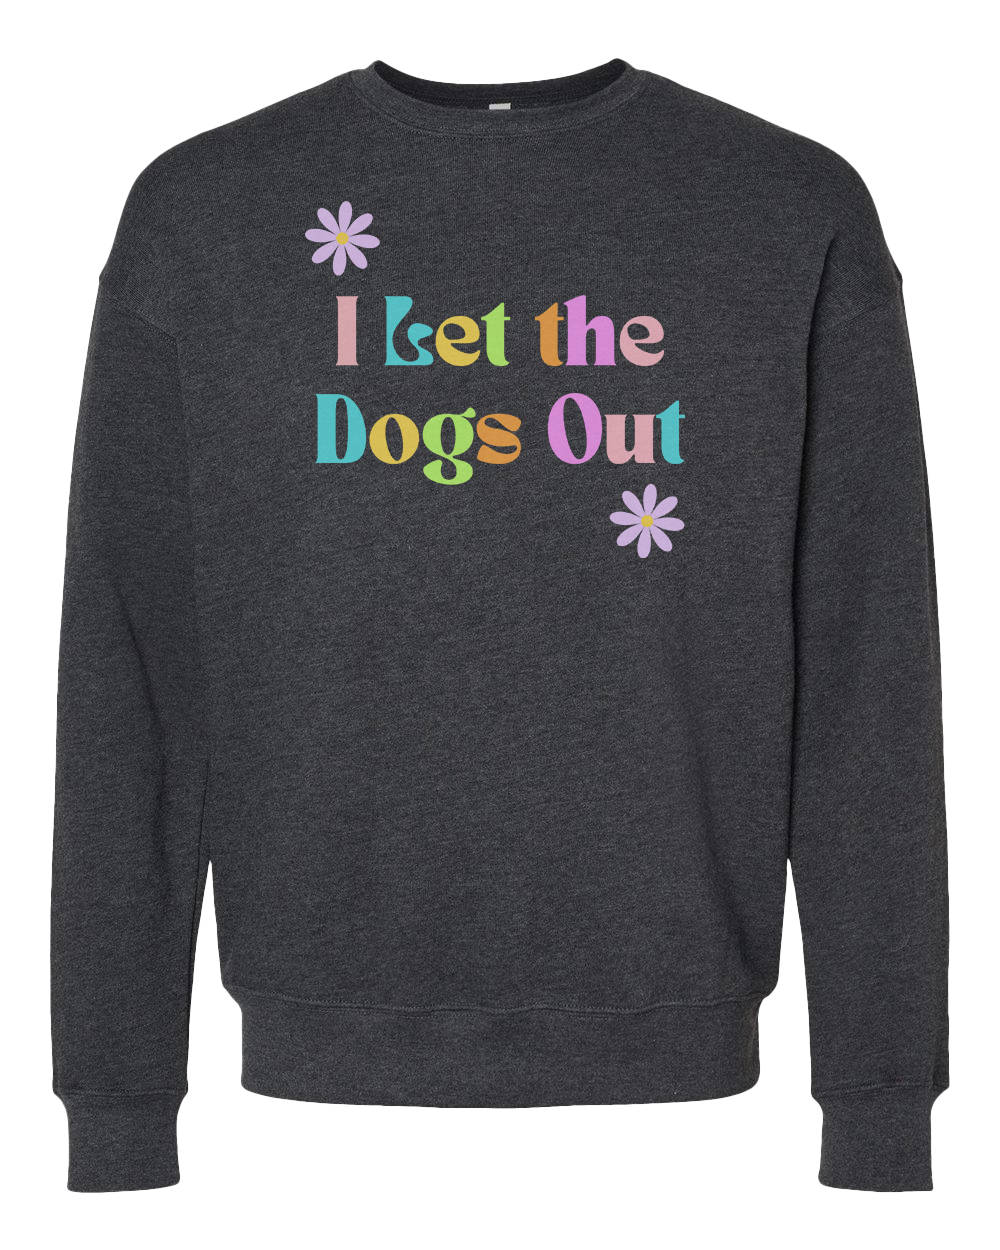 I Let The Dogs Out Crew Sweatshirt - Dark Grey Heather